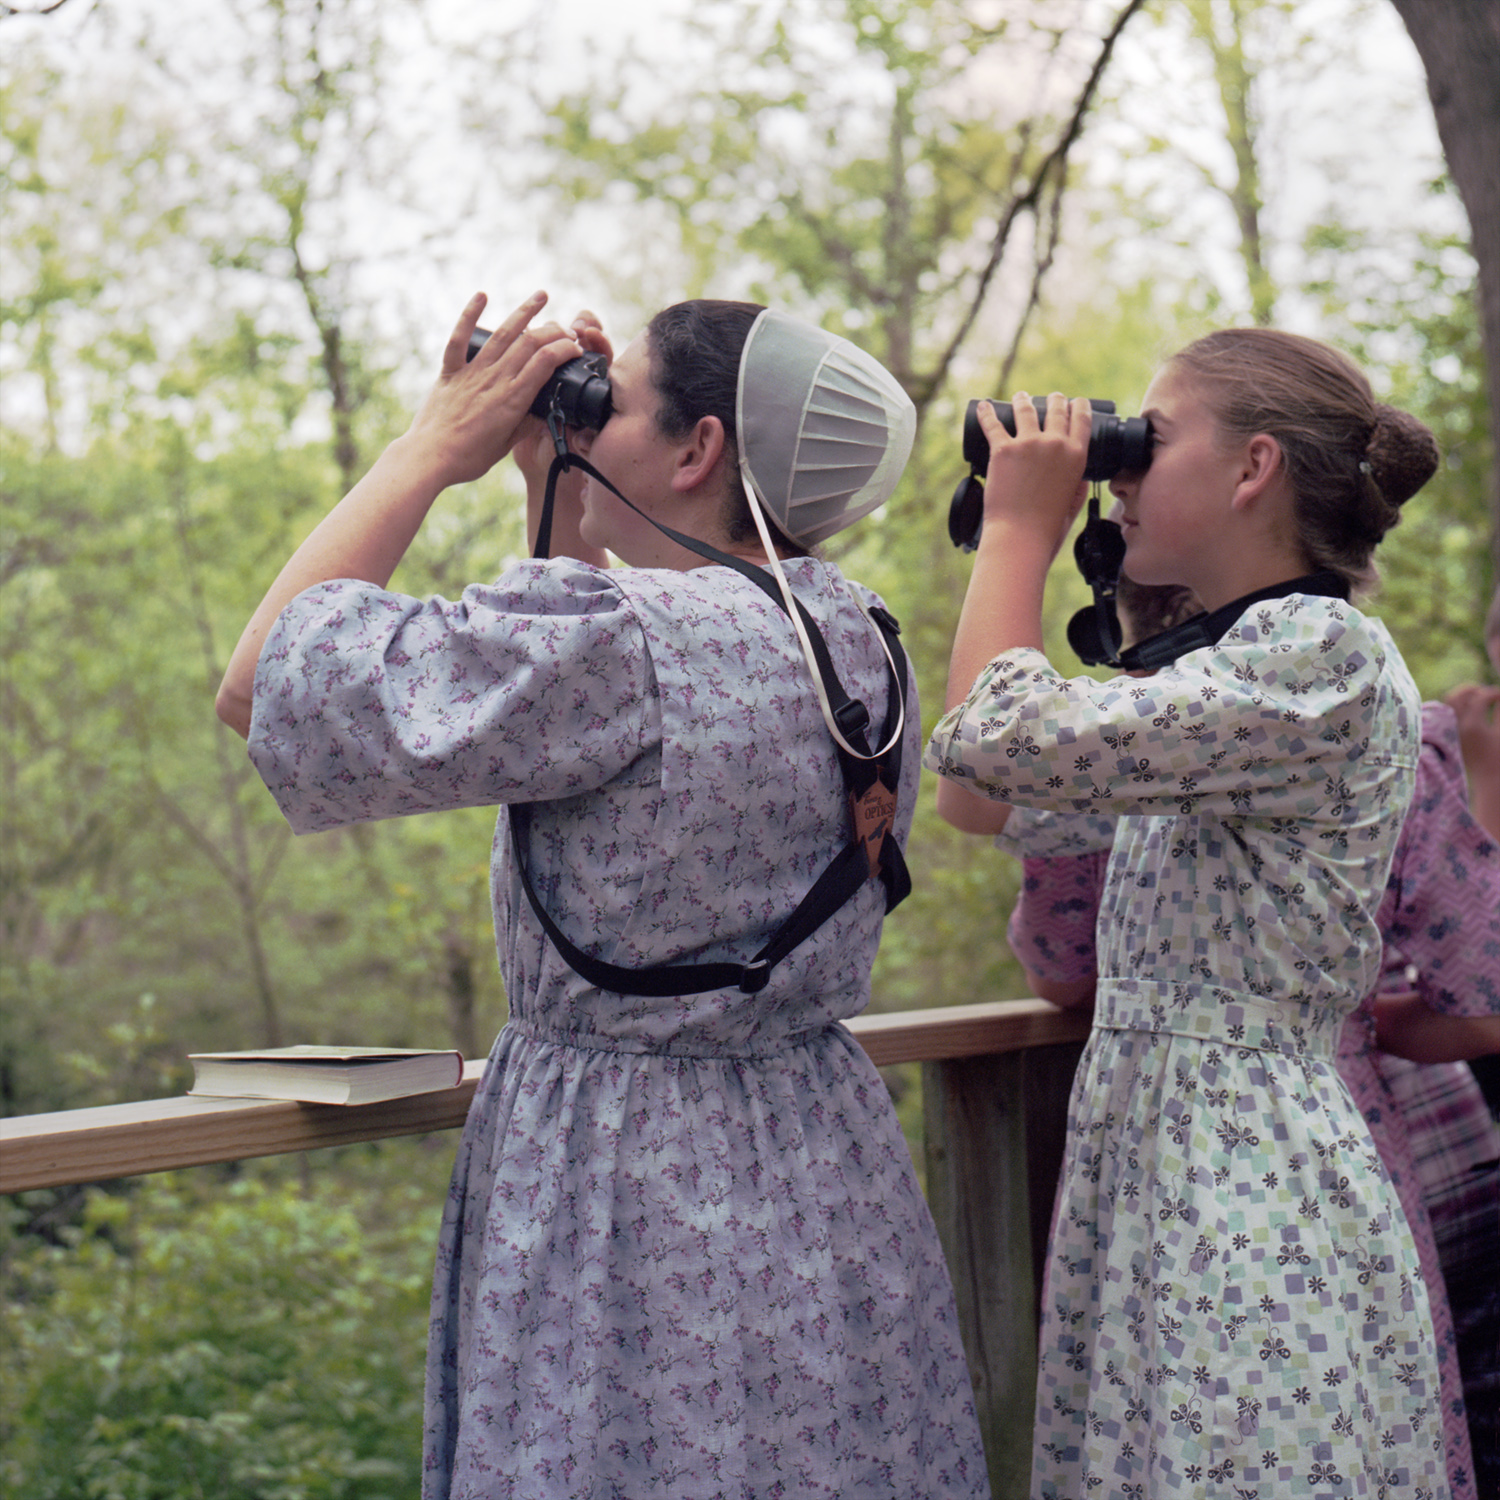  Young birders. Magee Marsh, OH 6x6 Color film 